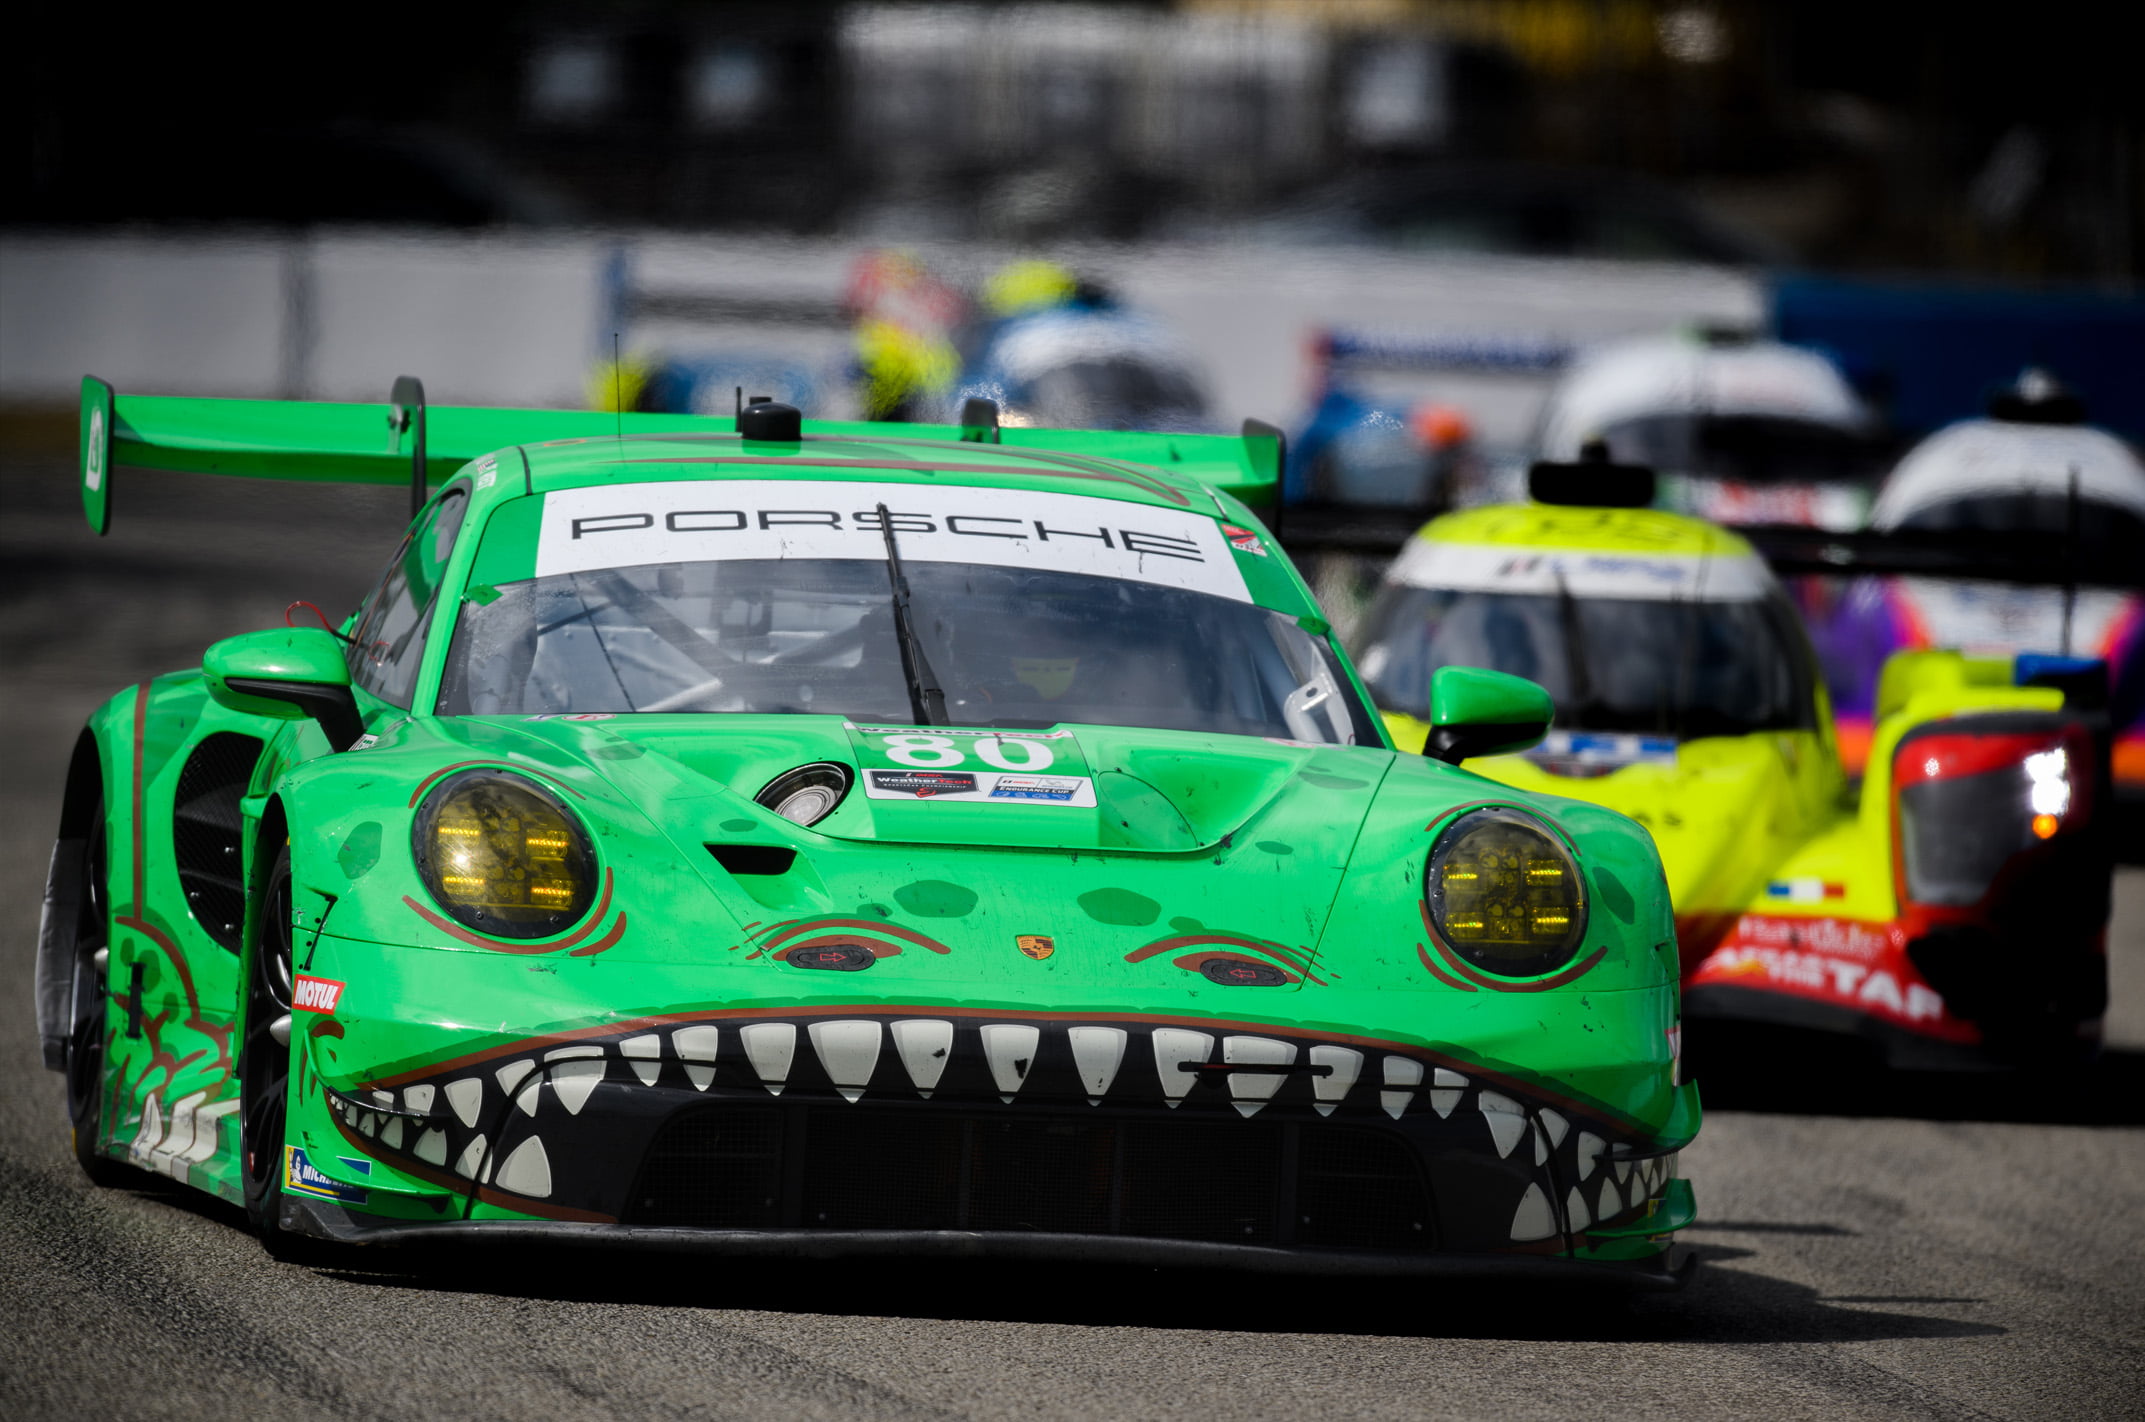 Rexy the “GT3 Rawr” Ready to Take on Laguna Seca with Priaulx and Jeannette